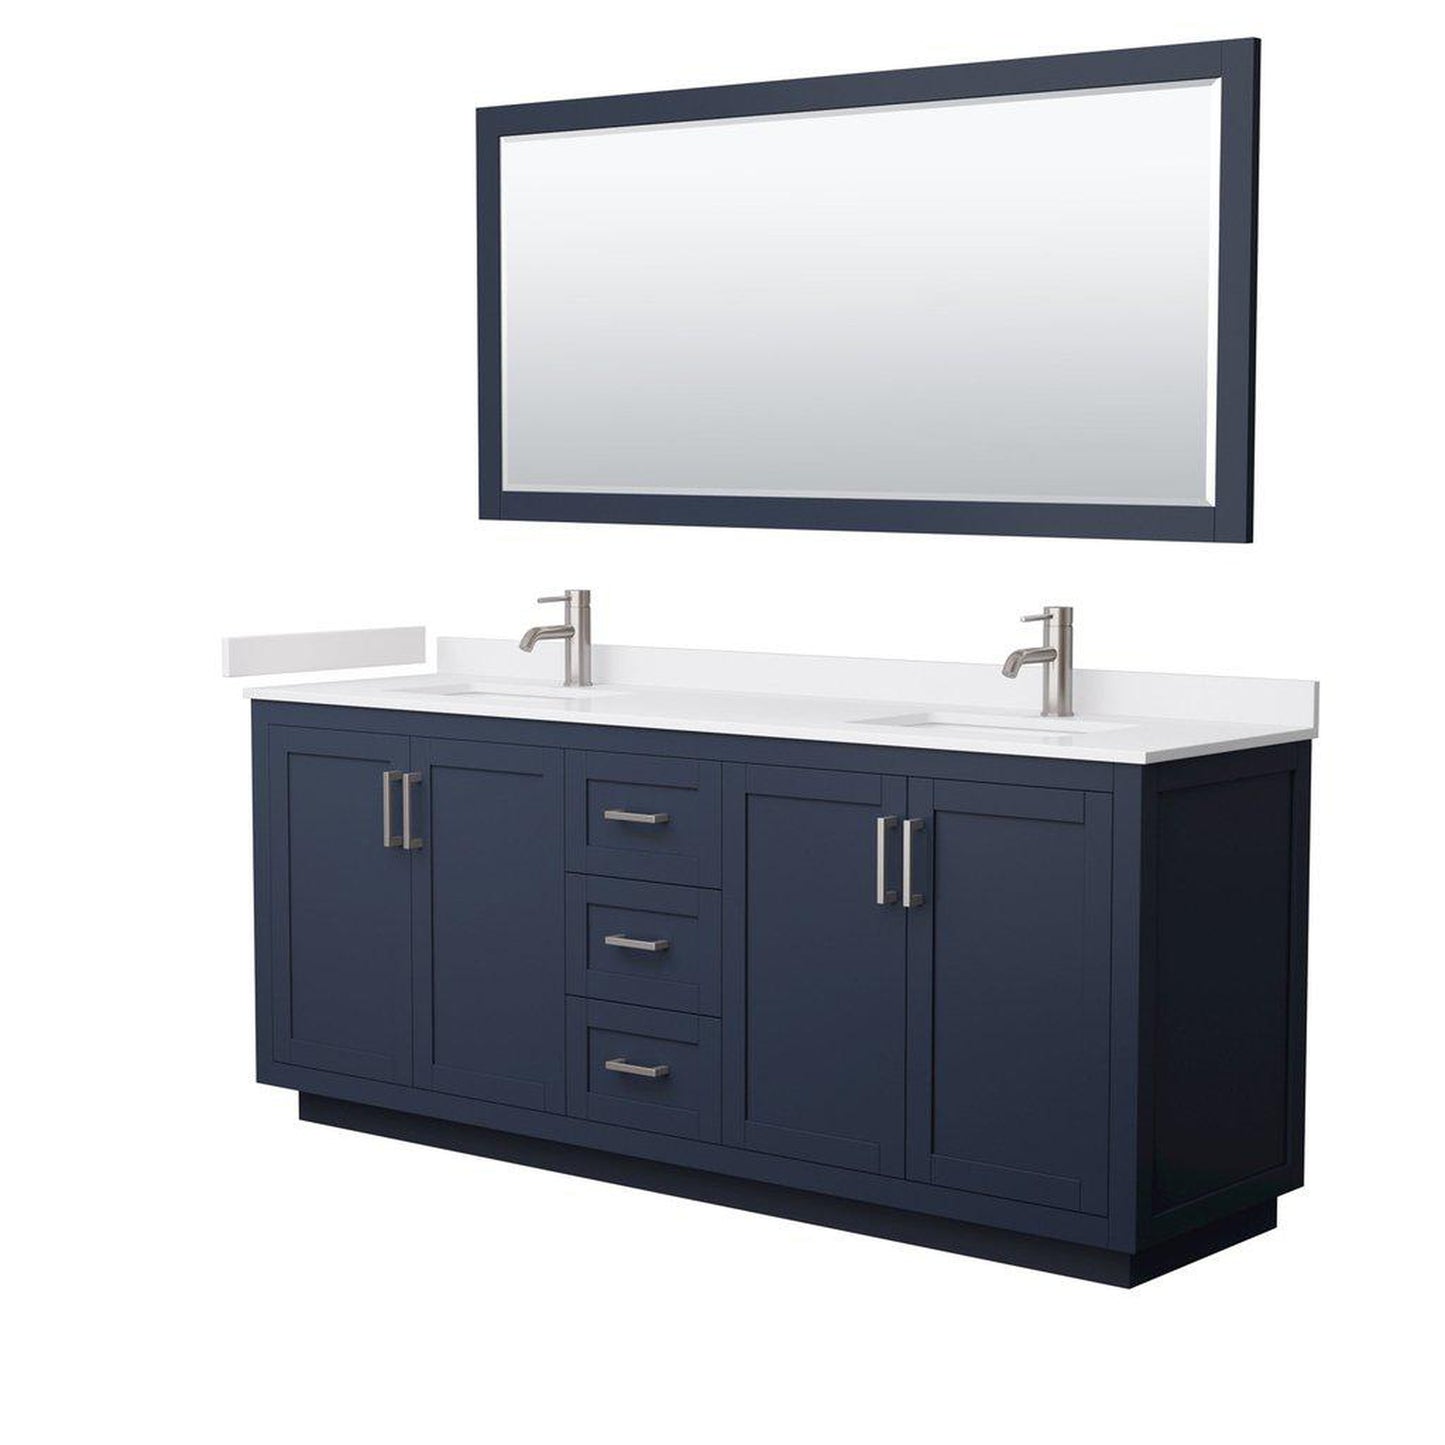 Wyndham Collection Miranda 80" Double Bathroom Dark Blue Vanity Set With White Cultured Marble Countertop, Undermount Square Sink, 70" Mirror And Brushed Nickel Trim